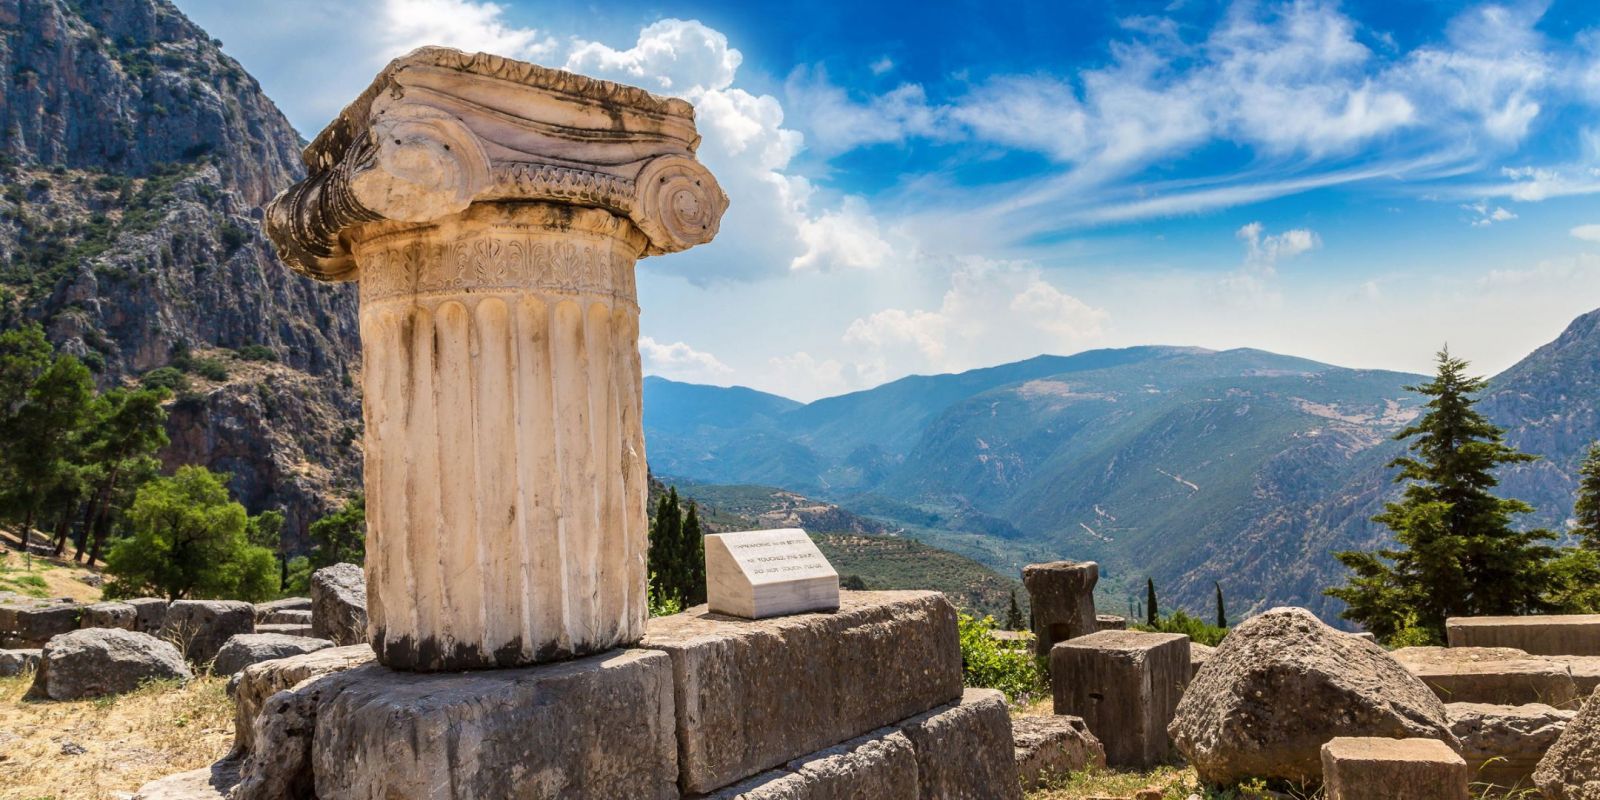 Delphi, Greece - All seasons central Greece discovery 10 days small tour from Athens. Small group tour with minivan by Monterrasol Travel.